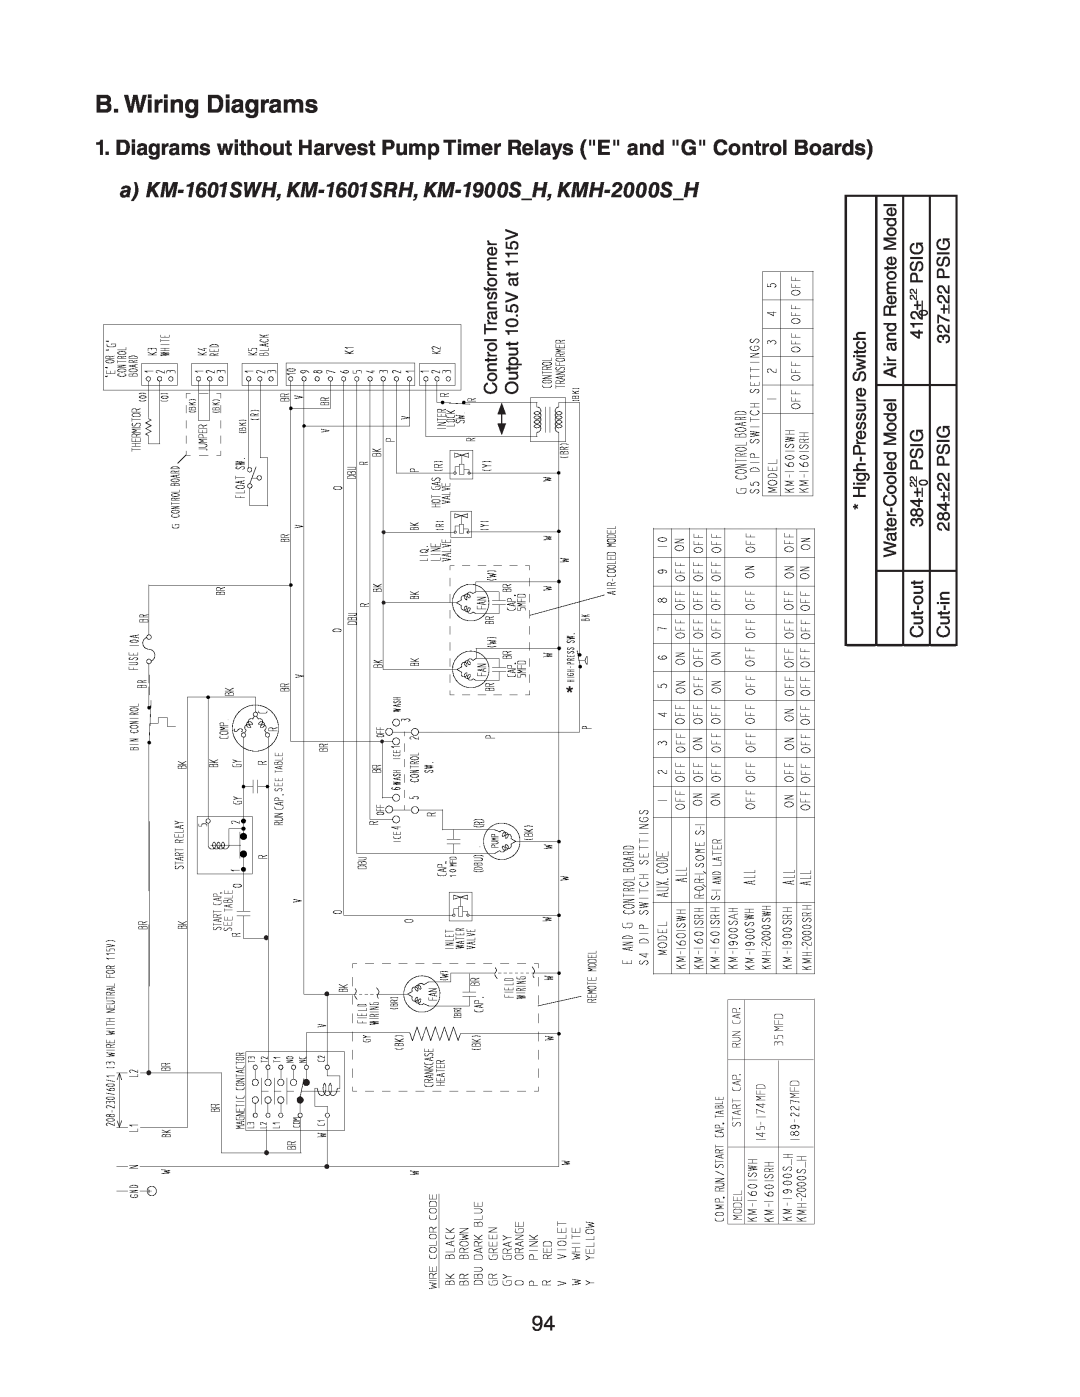 Hoshizaki KM-1301SAH/3, SRH/3, SWH/3 B. Wiring Diagrams, Diagrams without Harvest Pump Timer Relays E and G Control Boards 